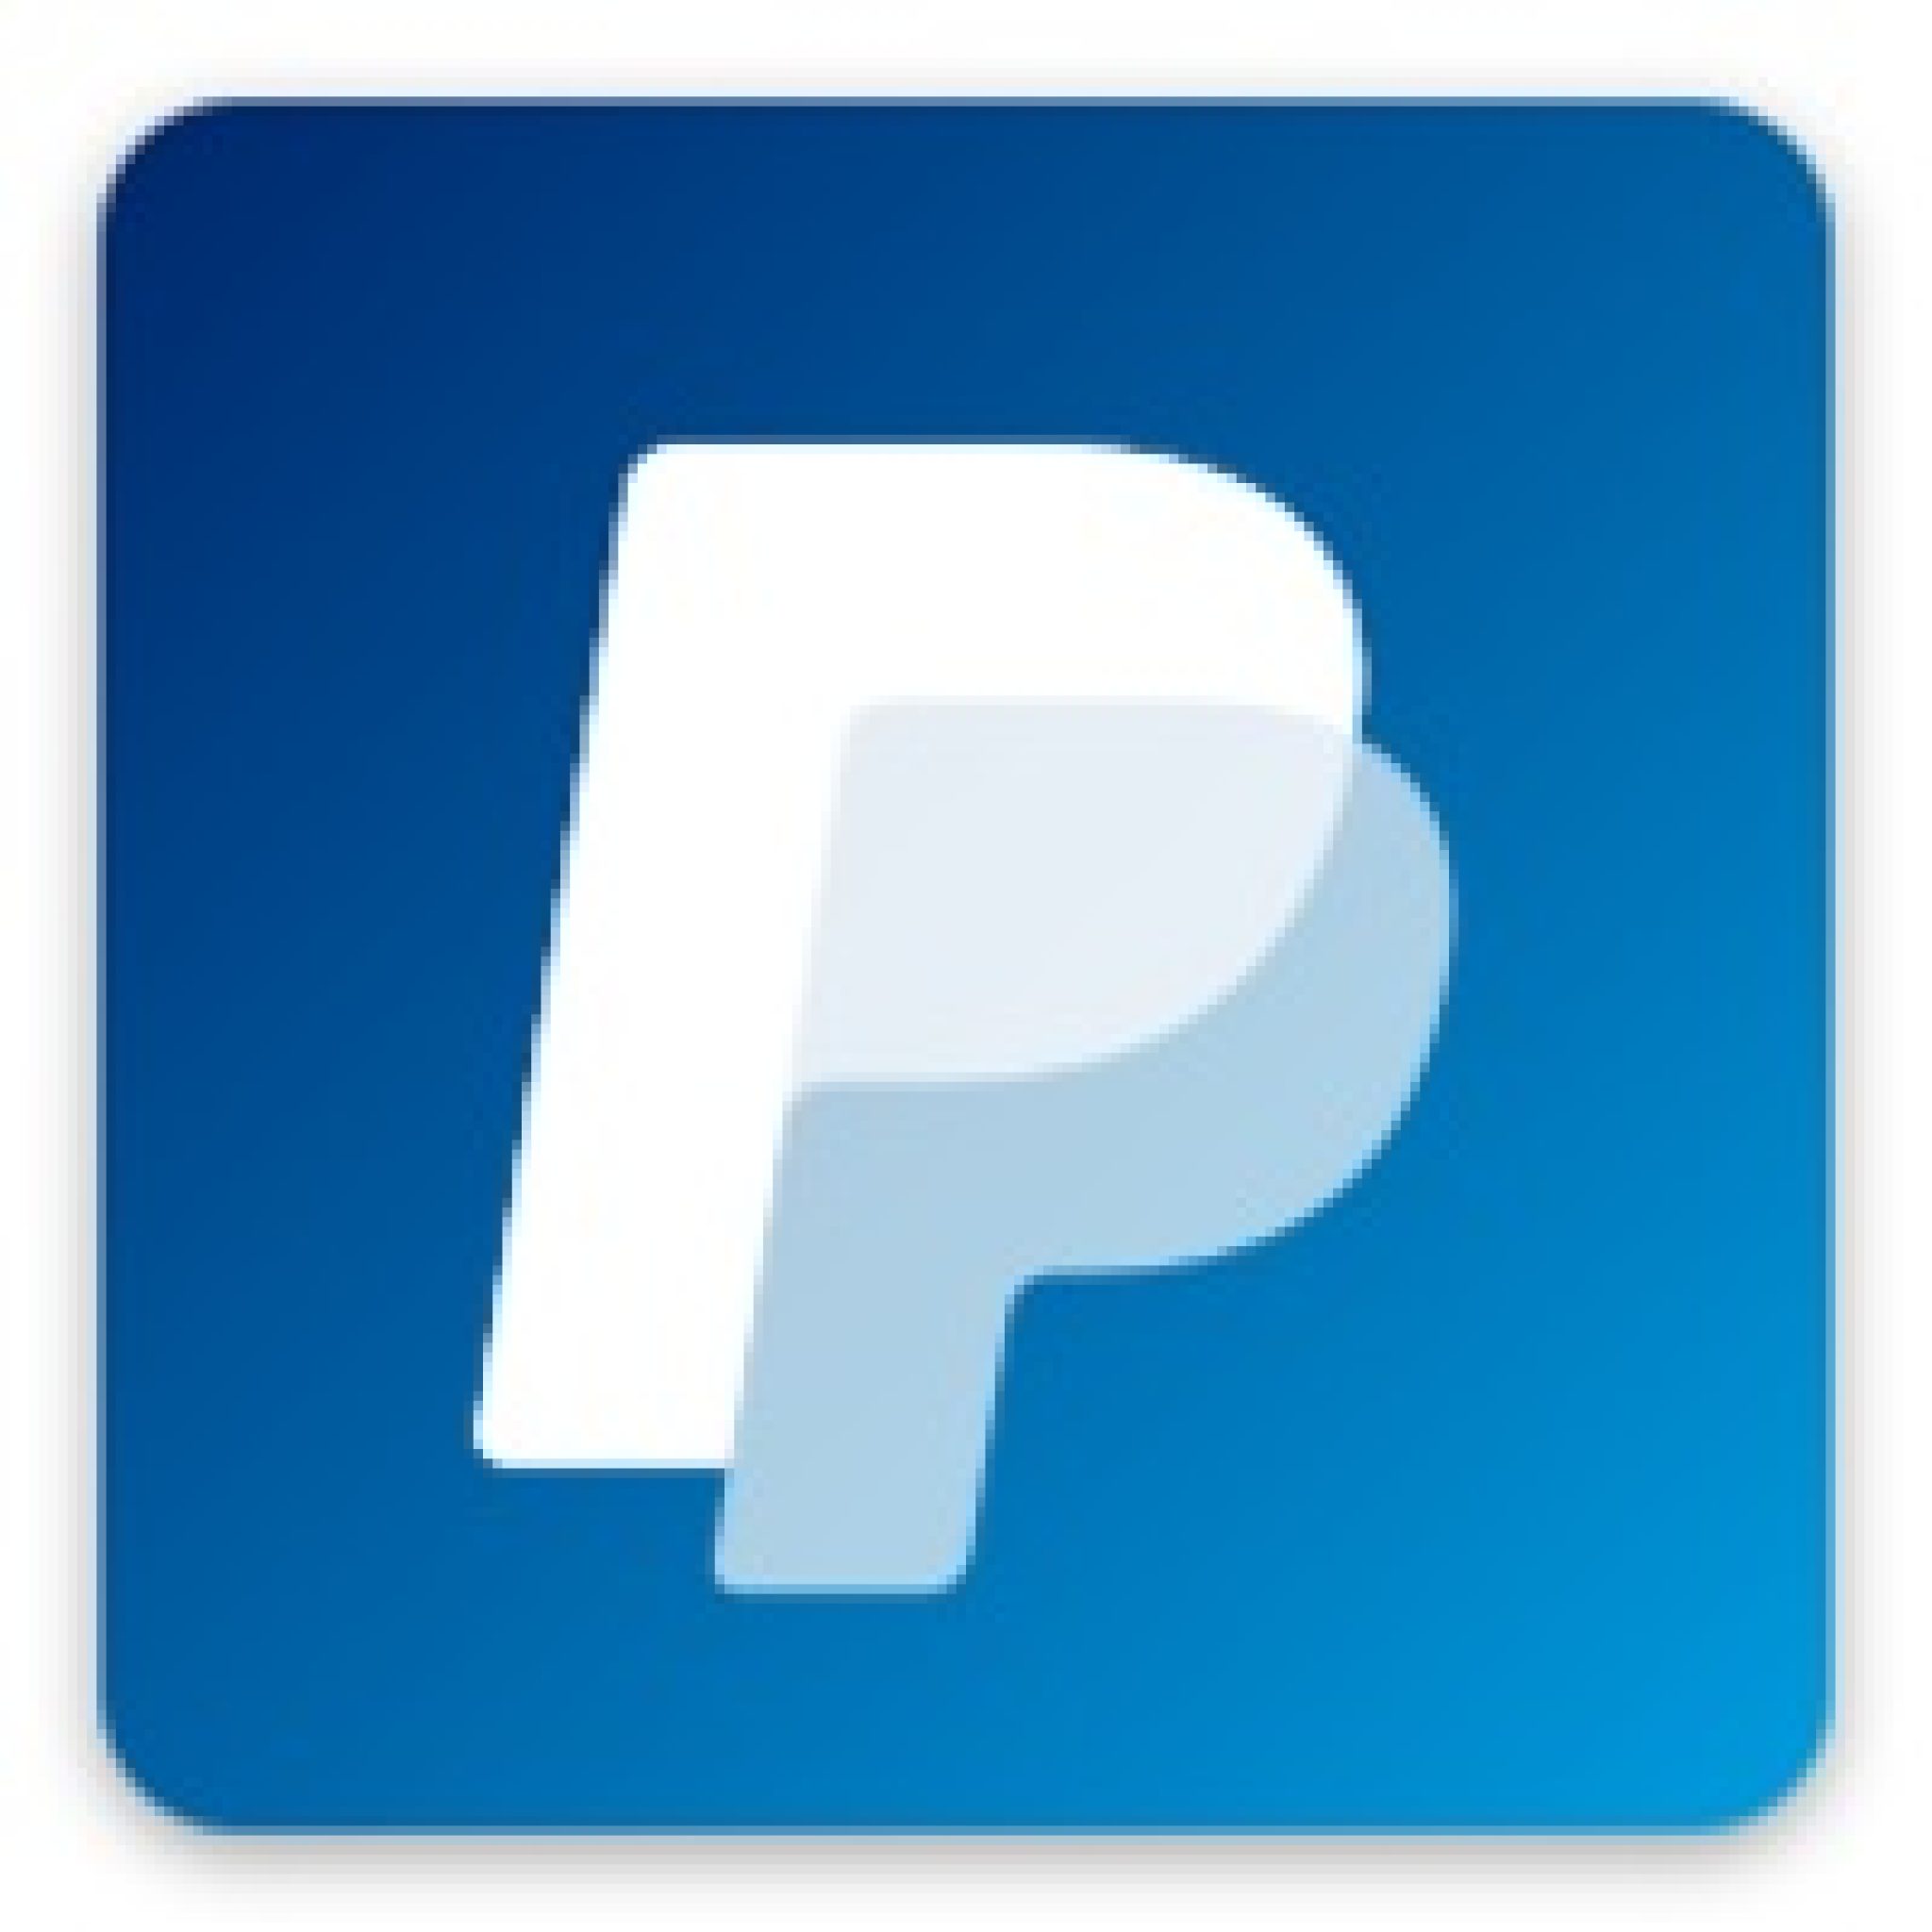 download paypal for pc windows 10